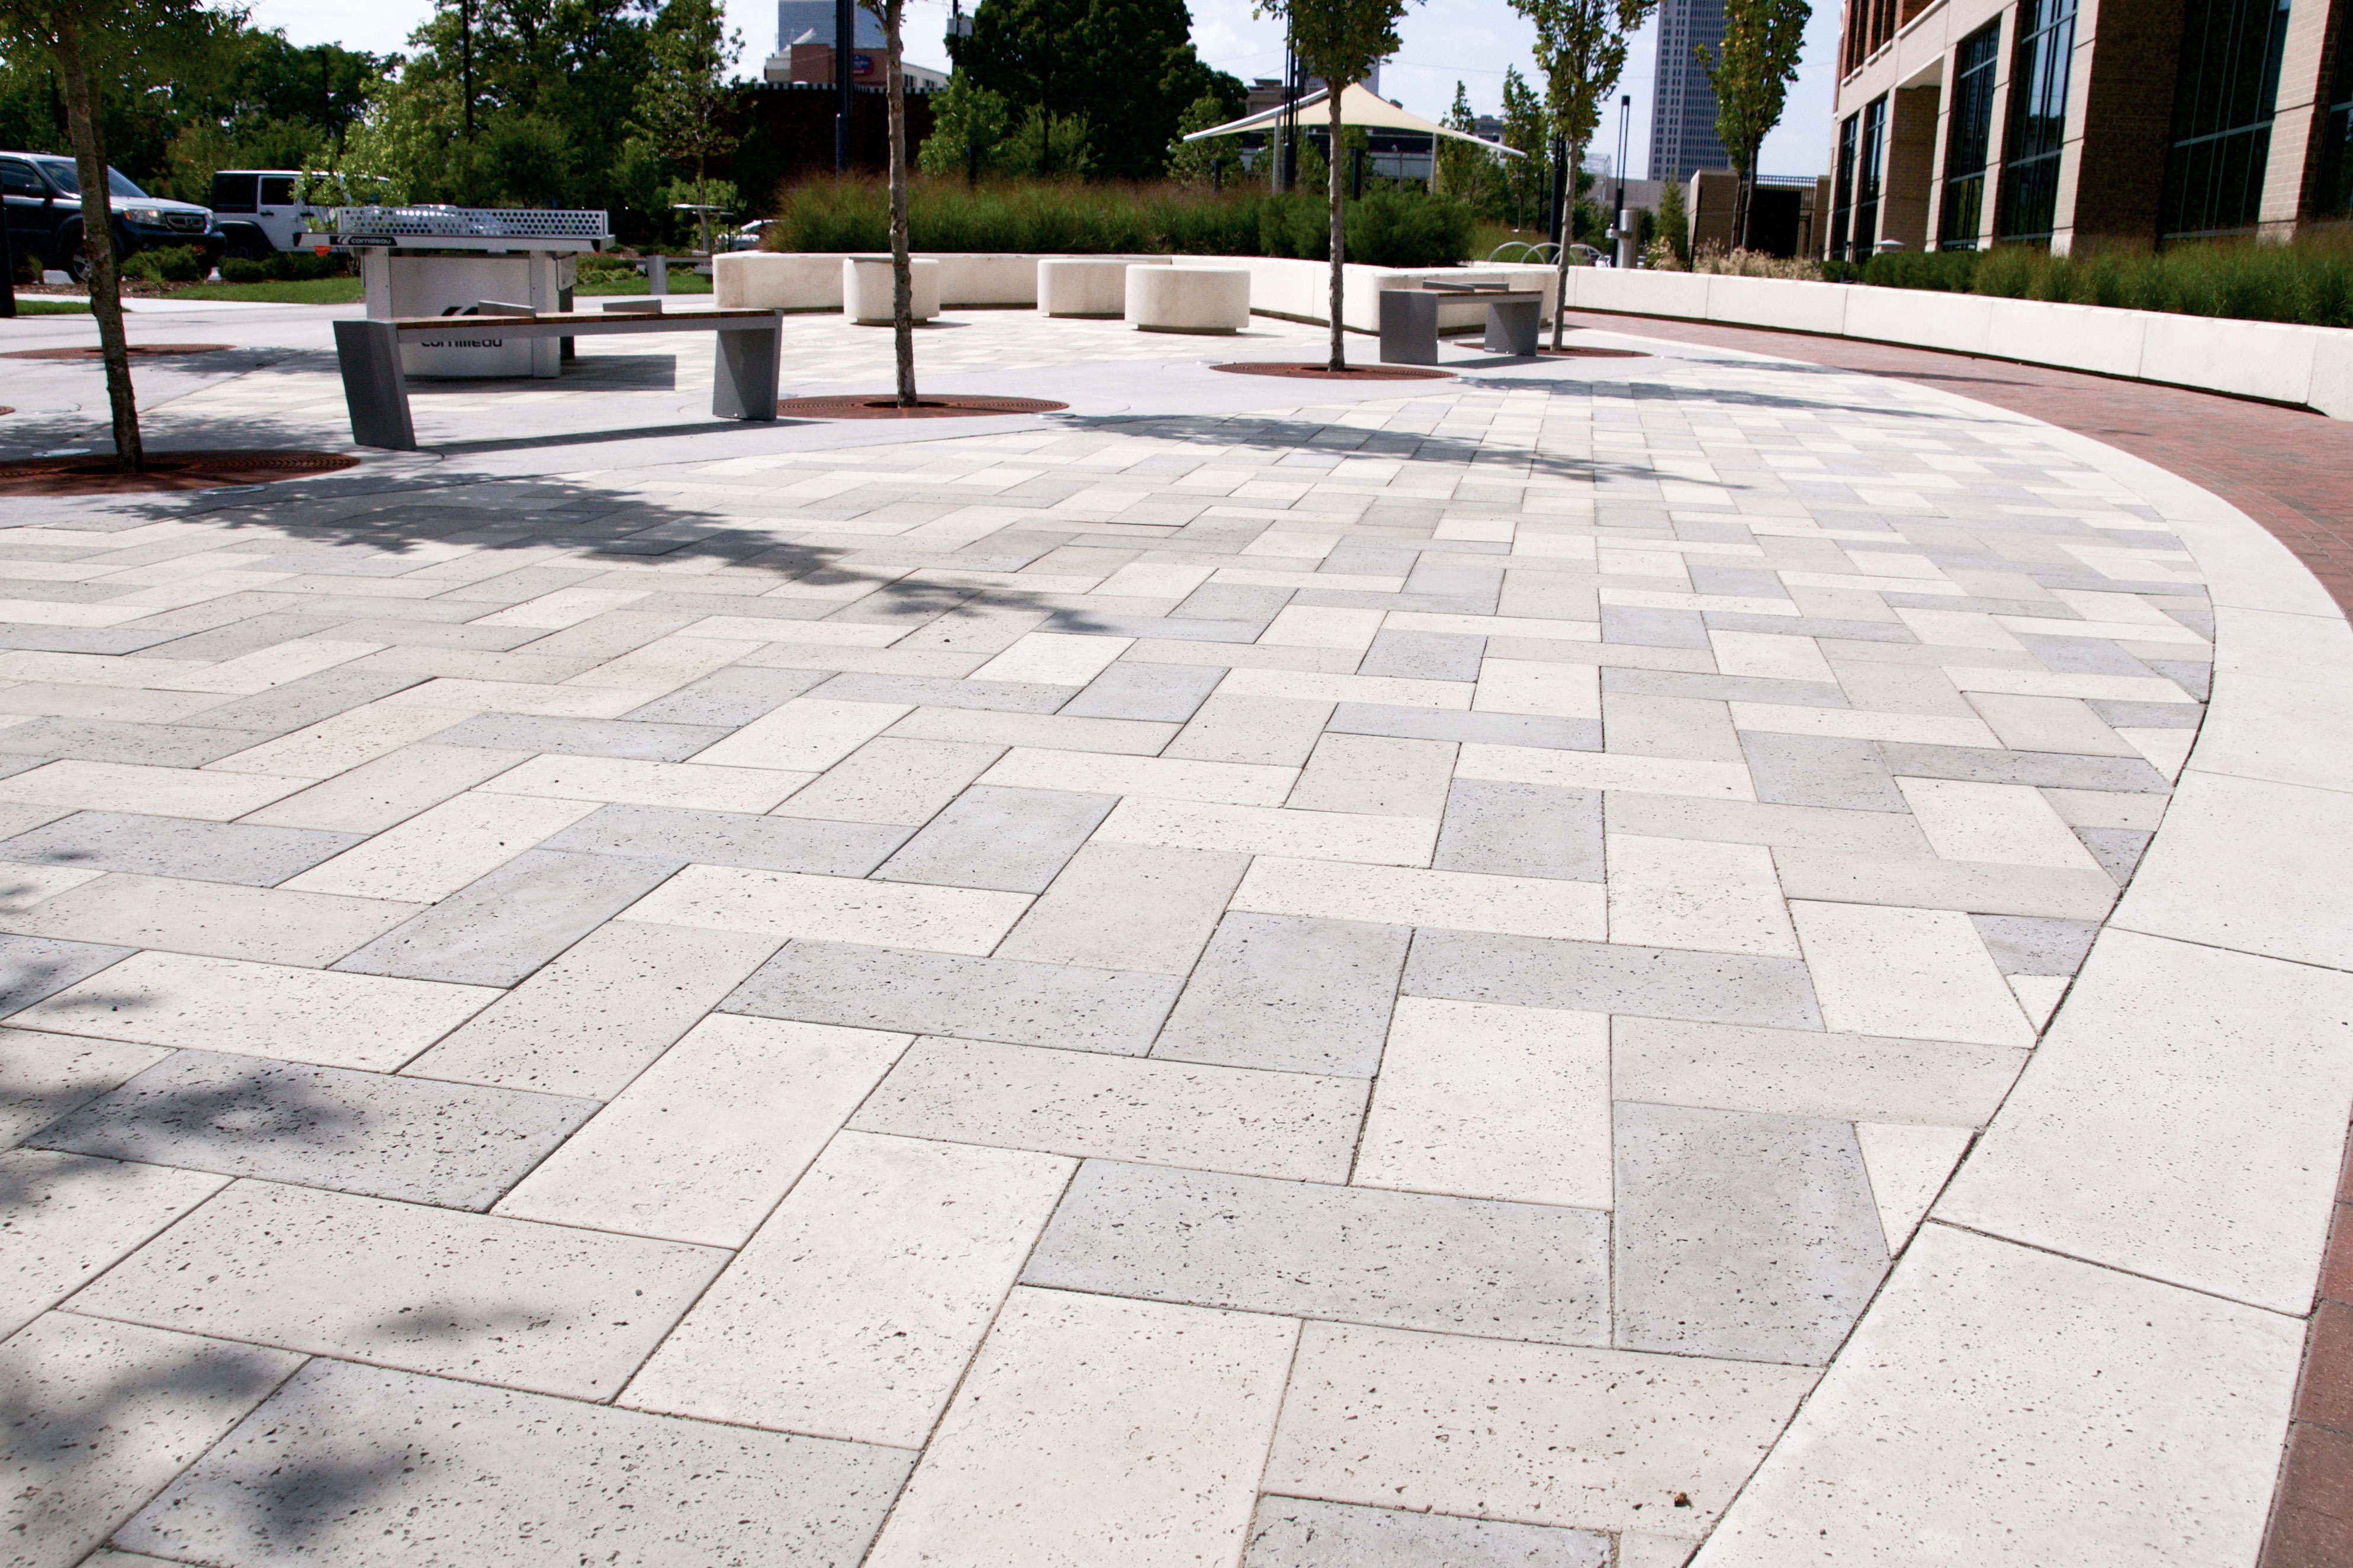 Rectangle Pavers and Custom Pavers combine for a herringbone pattern